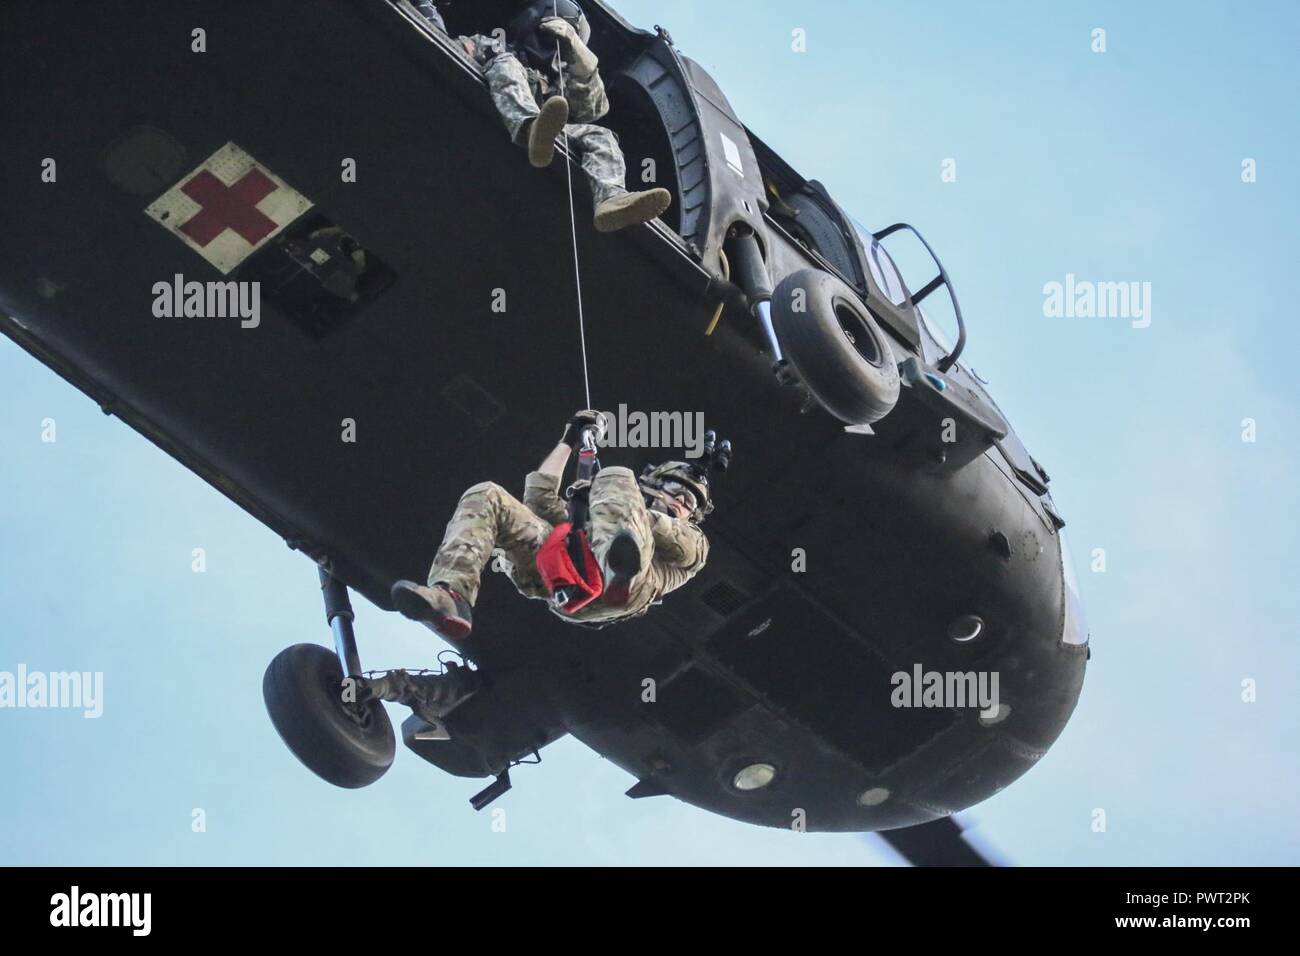 U.S. Air National Guard Senior Airman Michael Curley descends from a UH-60 Black Hawk helicopter during joint training for New Jersey Task Force One at Joint Base McGuire-Dix-Lakehurst, N.J., June 28, 2017. The primary mission of New Jersey Task Force One is to provide advanced technical search and rescue capabilities to victims trapped or entombed in structurally collapsed buildings. Task Force One is made up of New Jersey National Guard Soldiers and Airmen, as well as civilians. Stock Photo